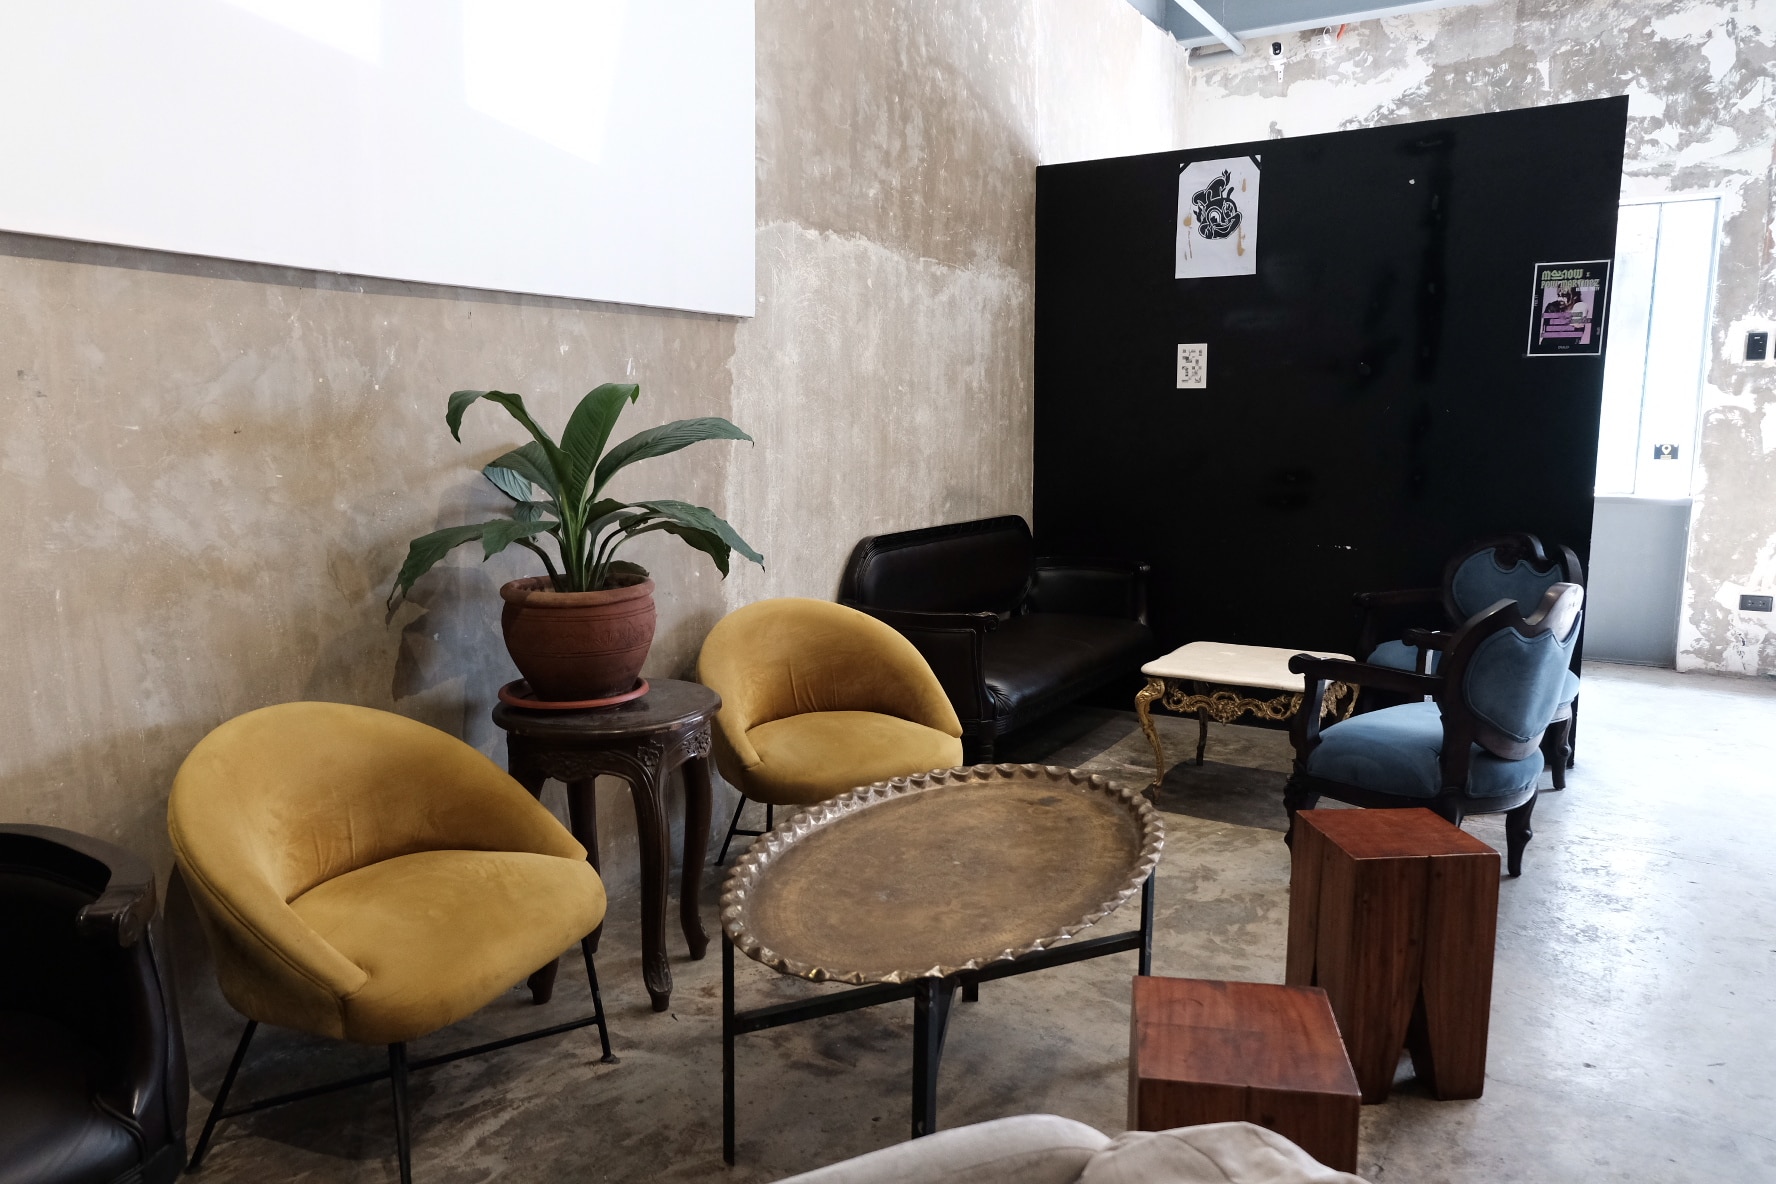 If you’re looking for a creative spot, this caf&#233; in Poblacion could be it. 4